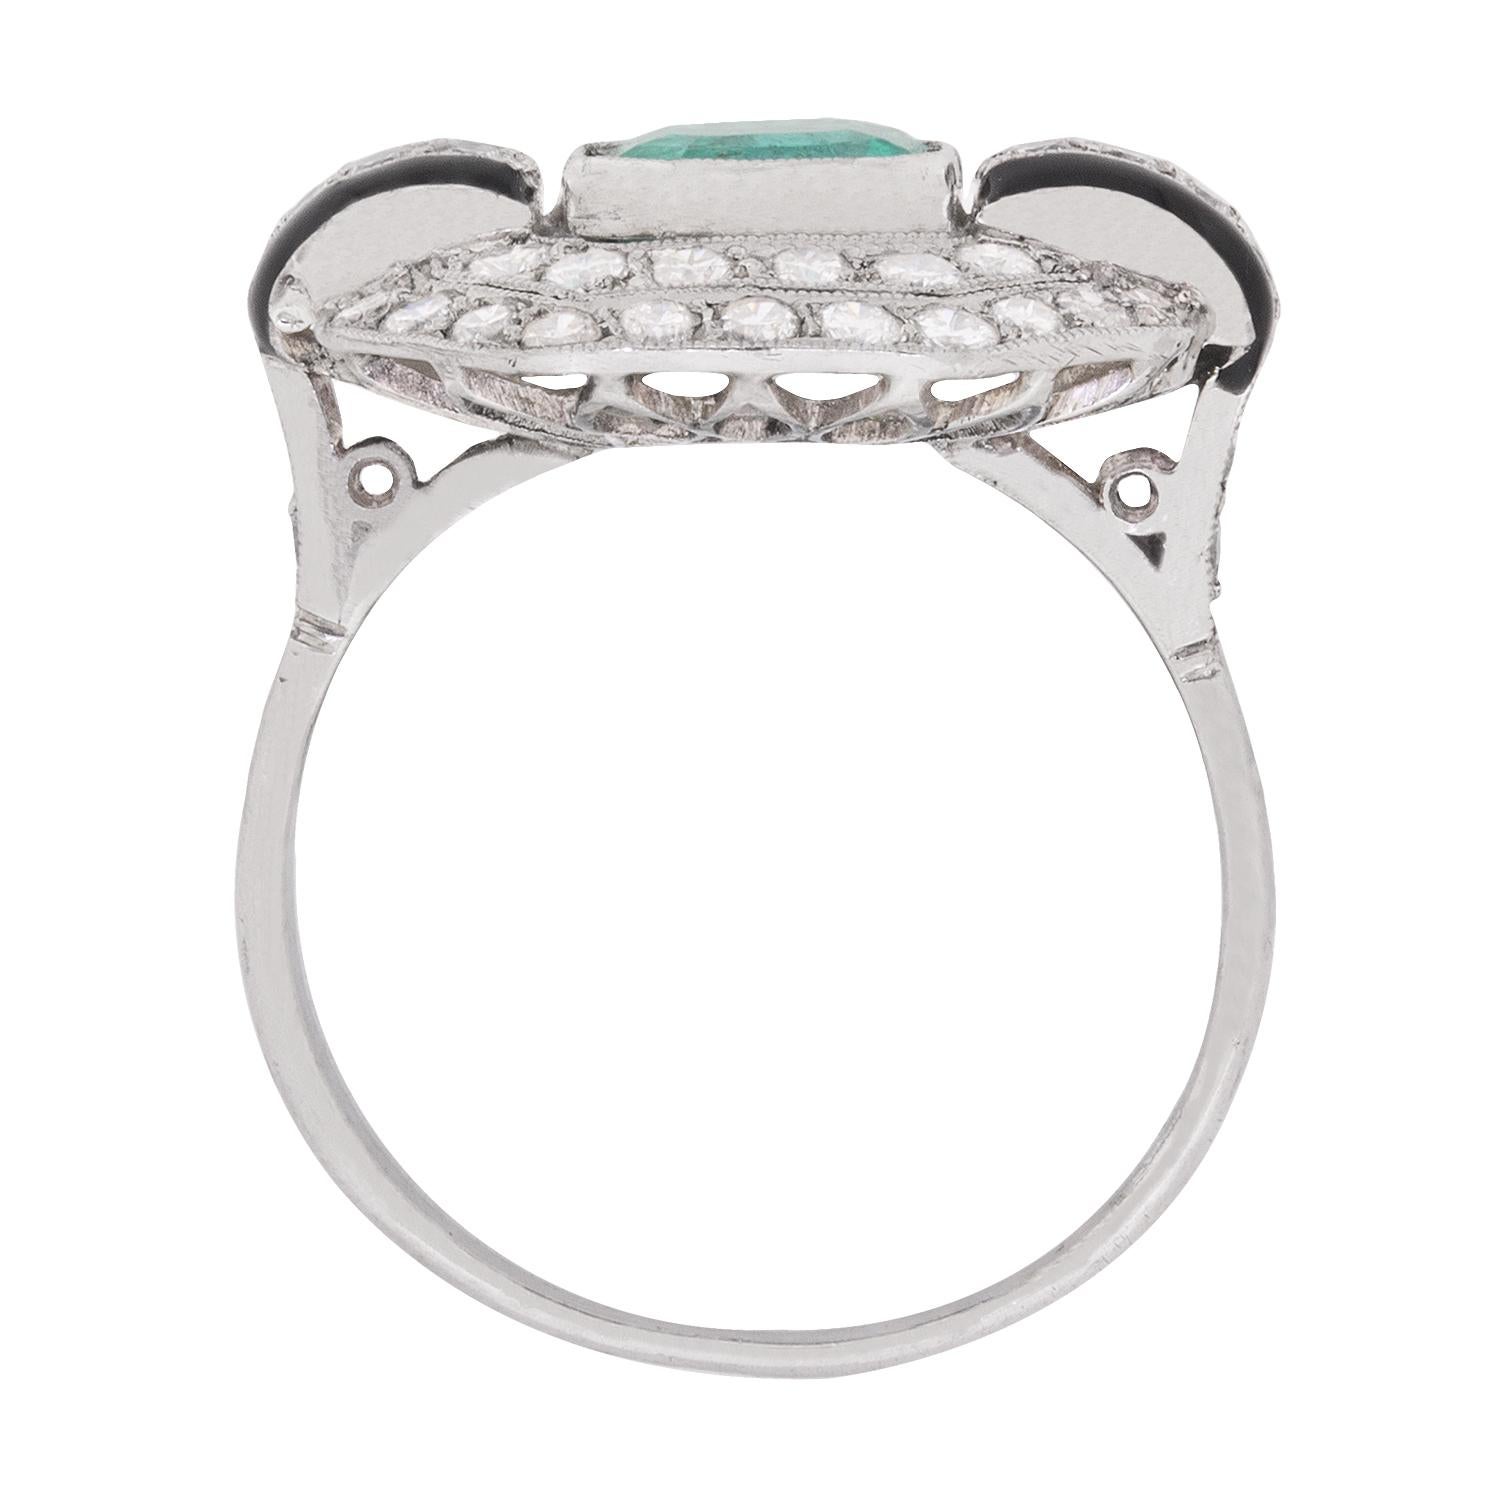 This vintage c.1950s ring, crafted in platinum and diamonds with black enamel accents, is designed around a 1.50 carat emerald.

A double octagonal halo of grain-set round brilliant cut diamonds that totals to 0.60 carats, embellishes this colourful